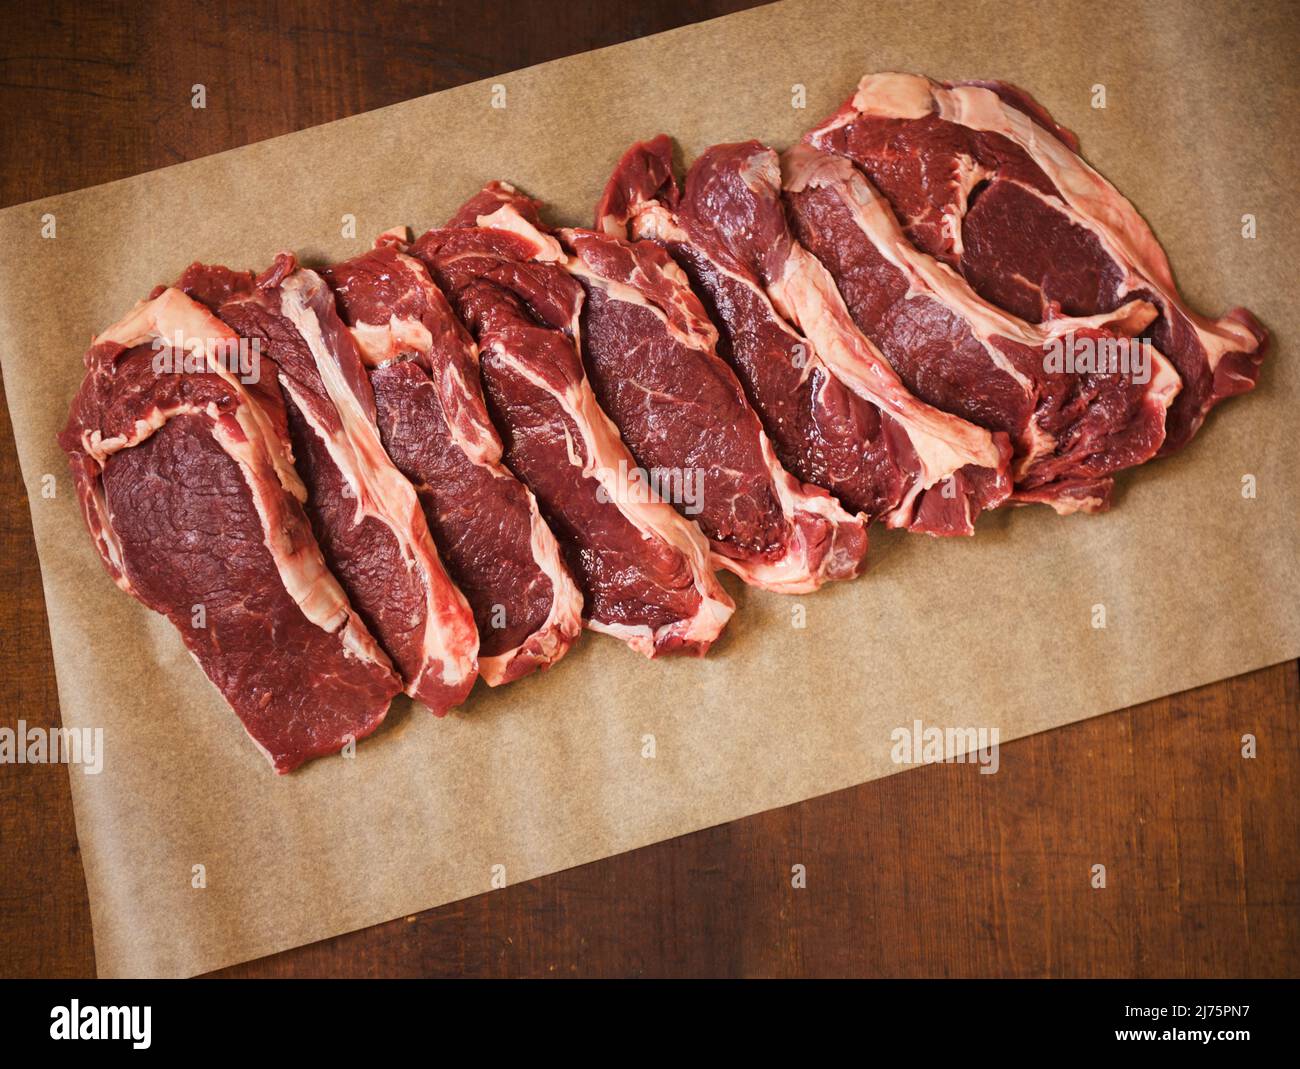 Raw Grass Fed Rib-Eye Steaks on Parchment Paper Stock Photo